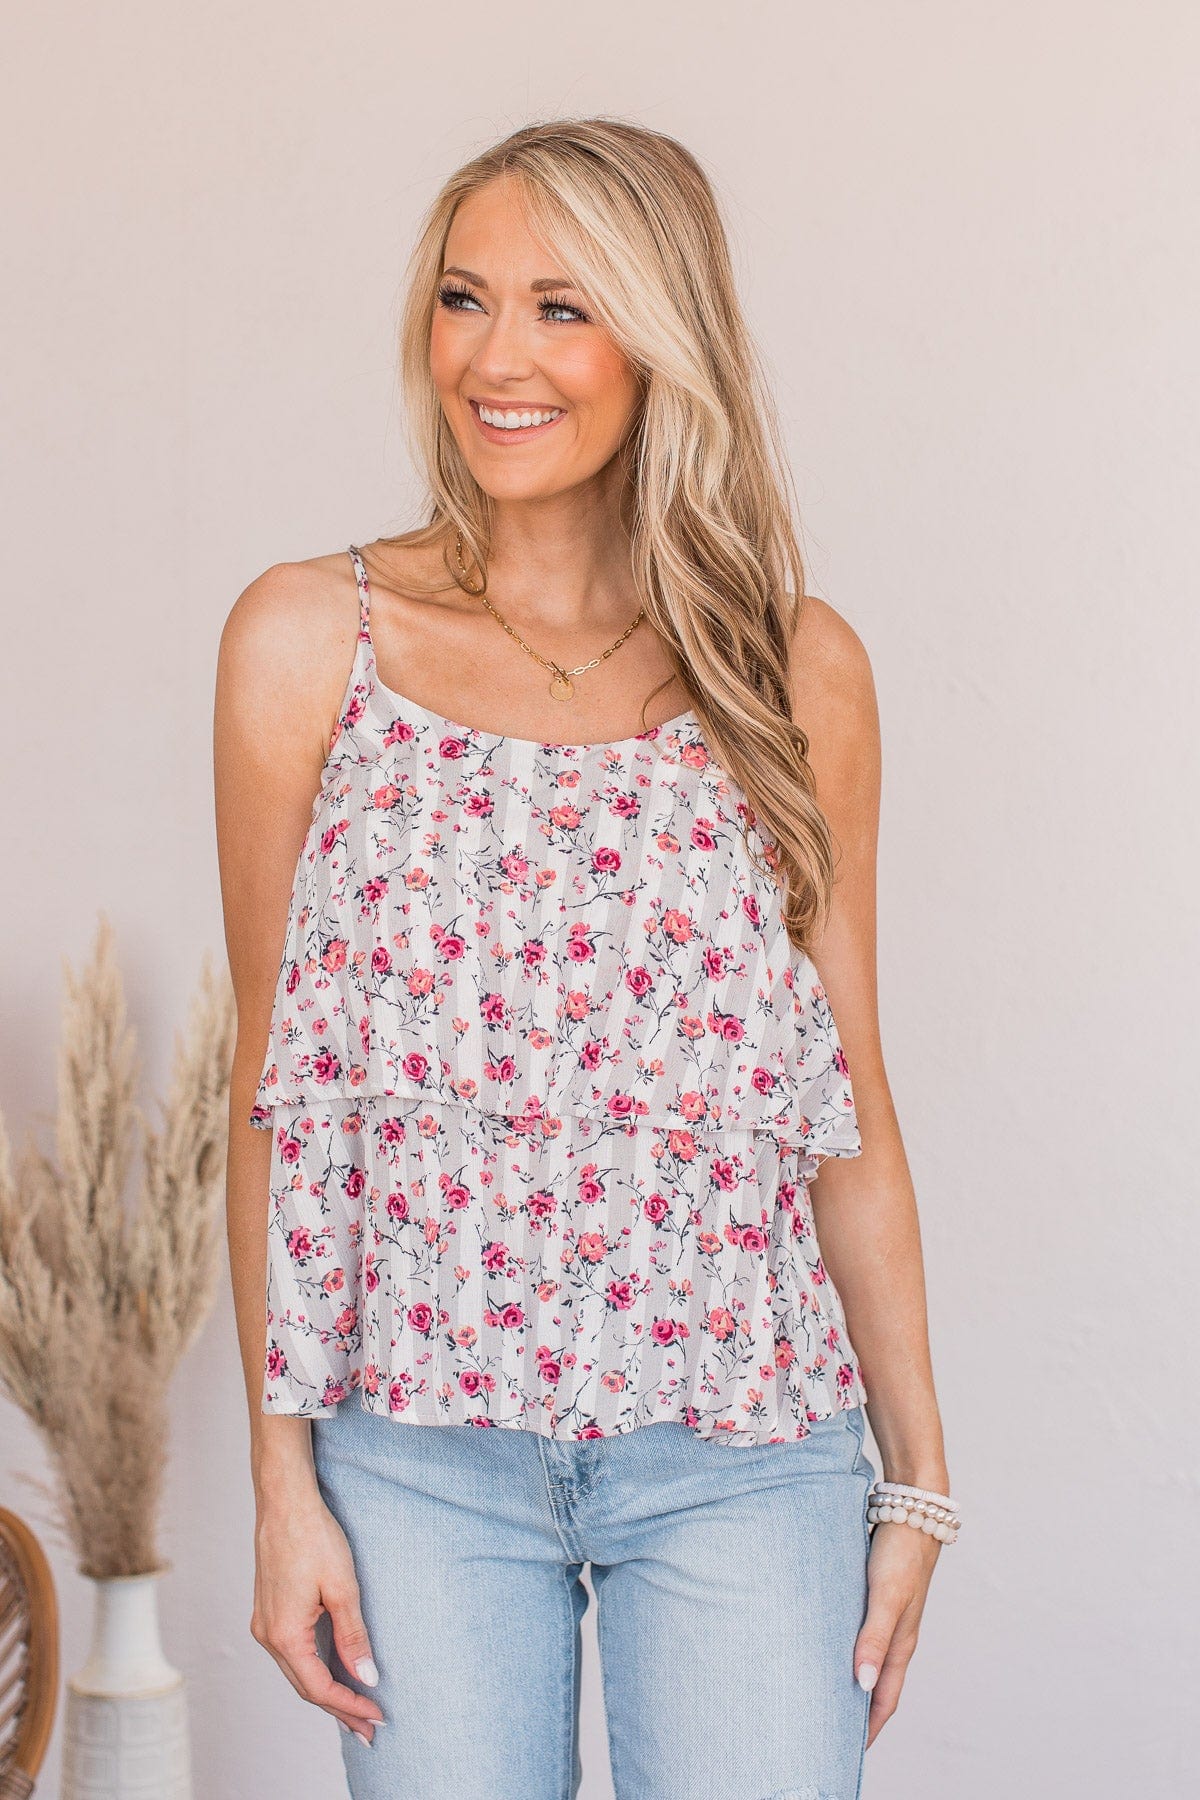 Make Today Count Floral Tank- Gray